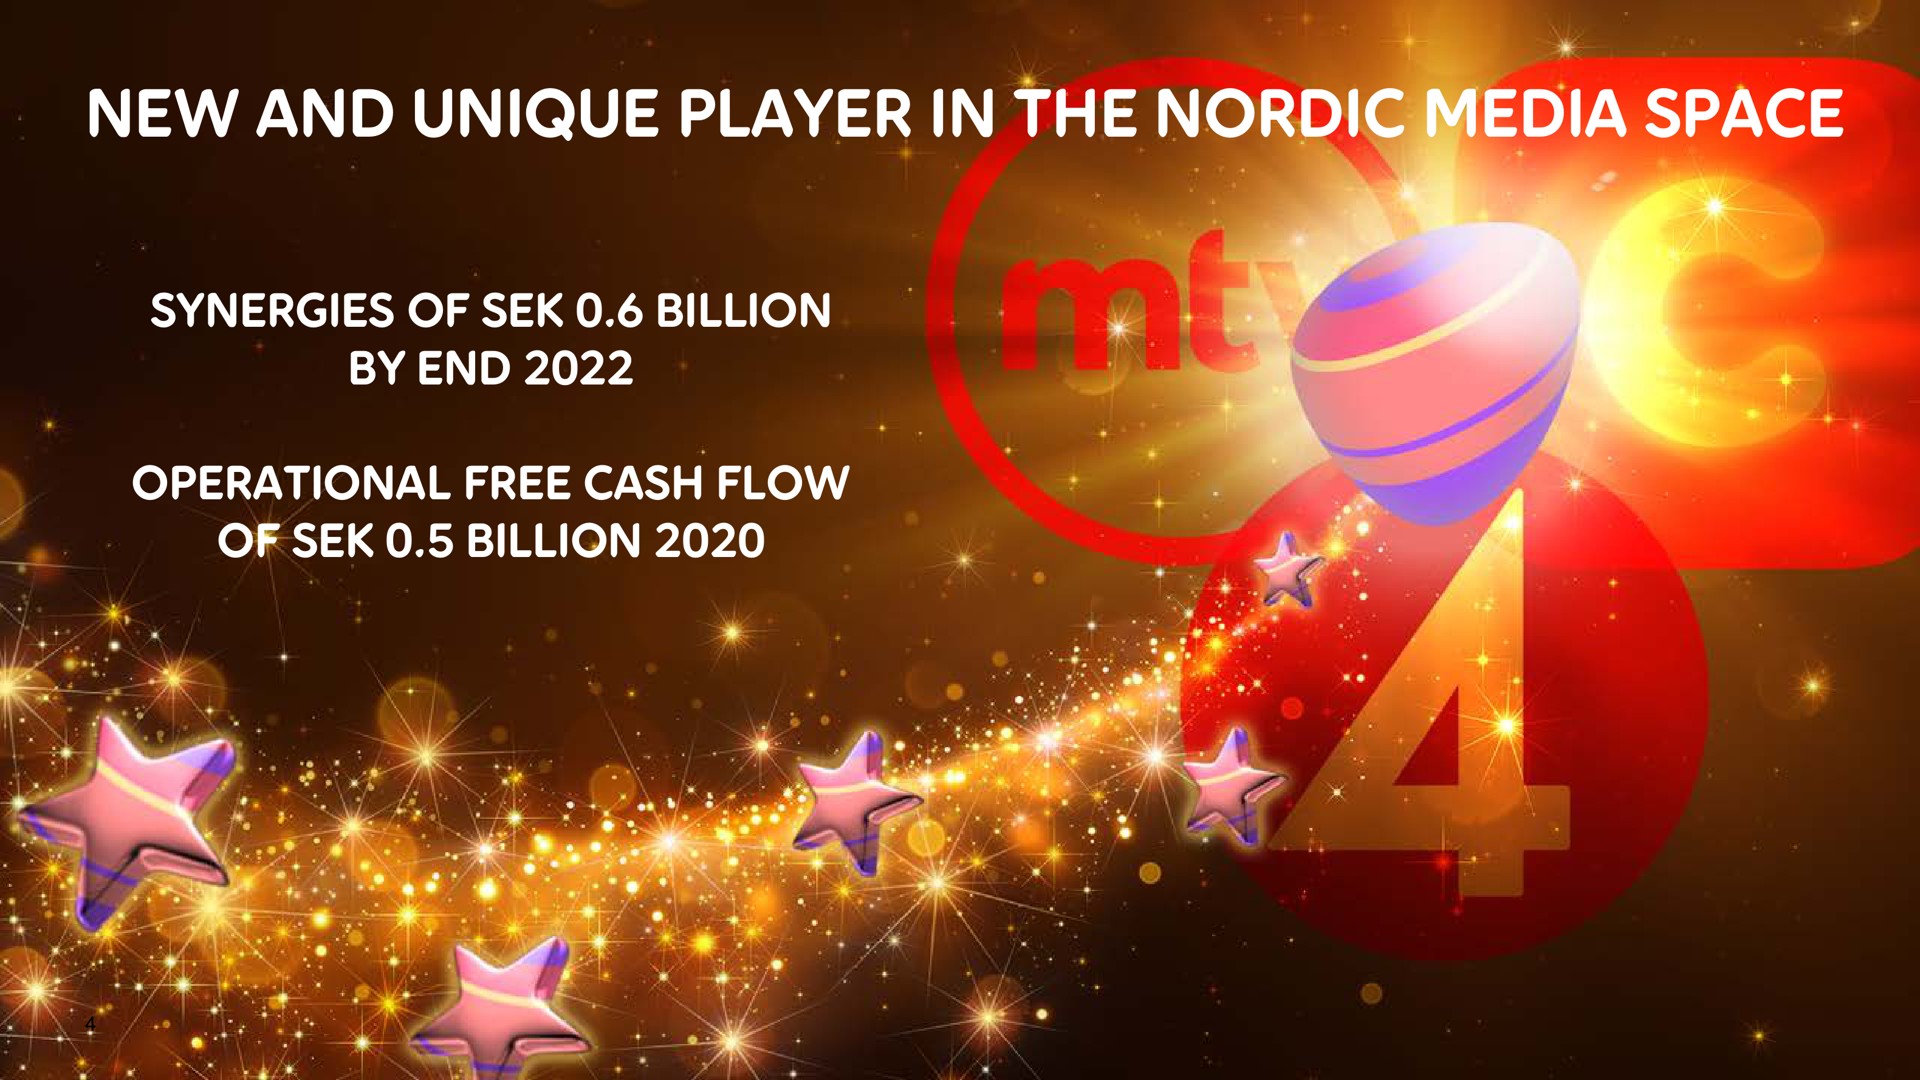 new and unique player in the media space | Telia Company